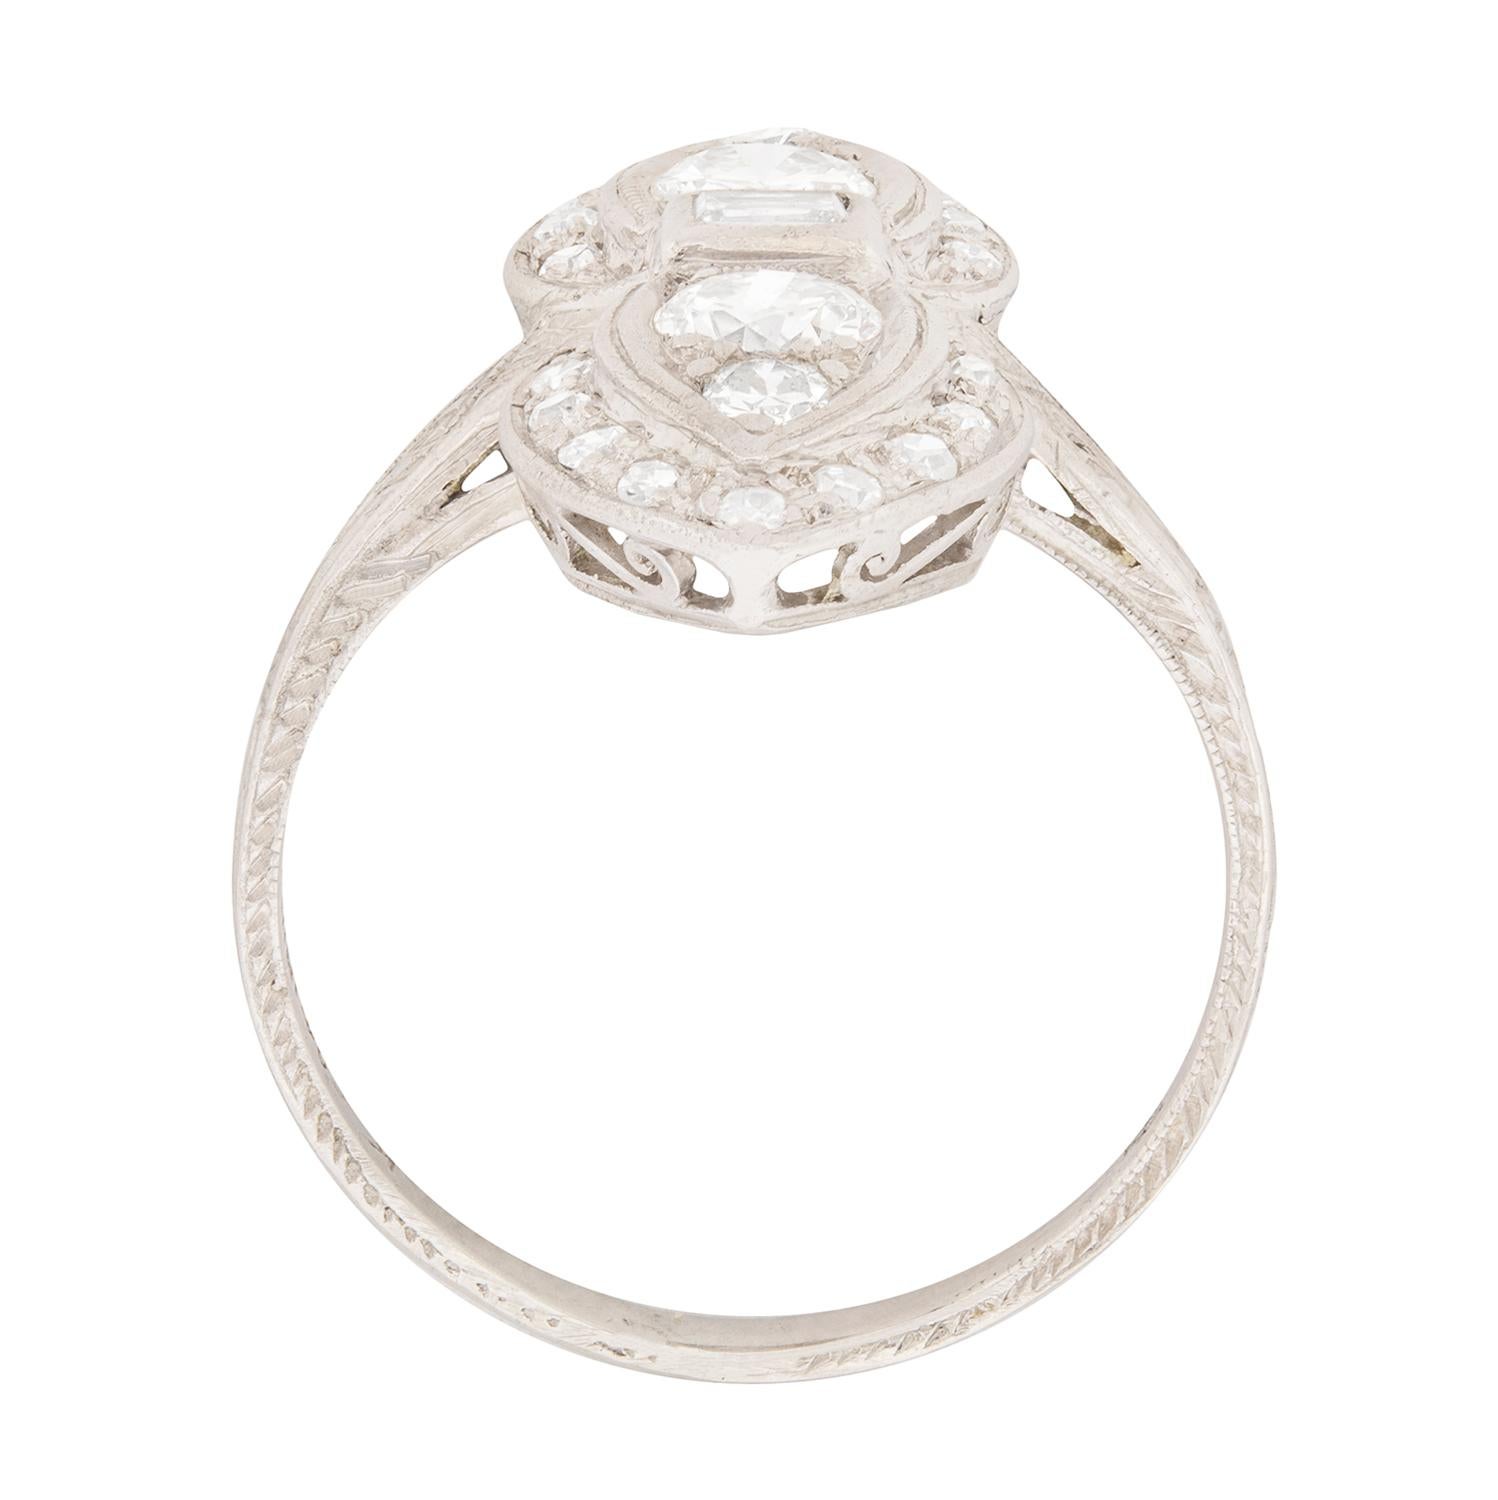 This elegant art deco ring features 1.06 carats of old cut and baguette diamonds. Intricate in design, two 0.30 old cut diamonds are surrounded by smaller old cut diamonds in an arching pattern. The two arches centre around a baguette diamond. The